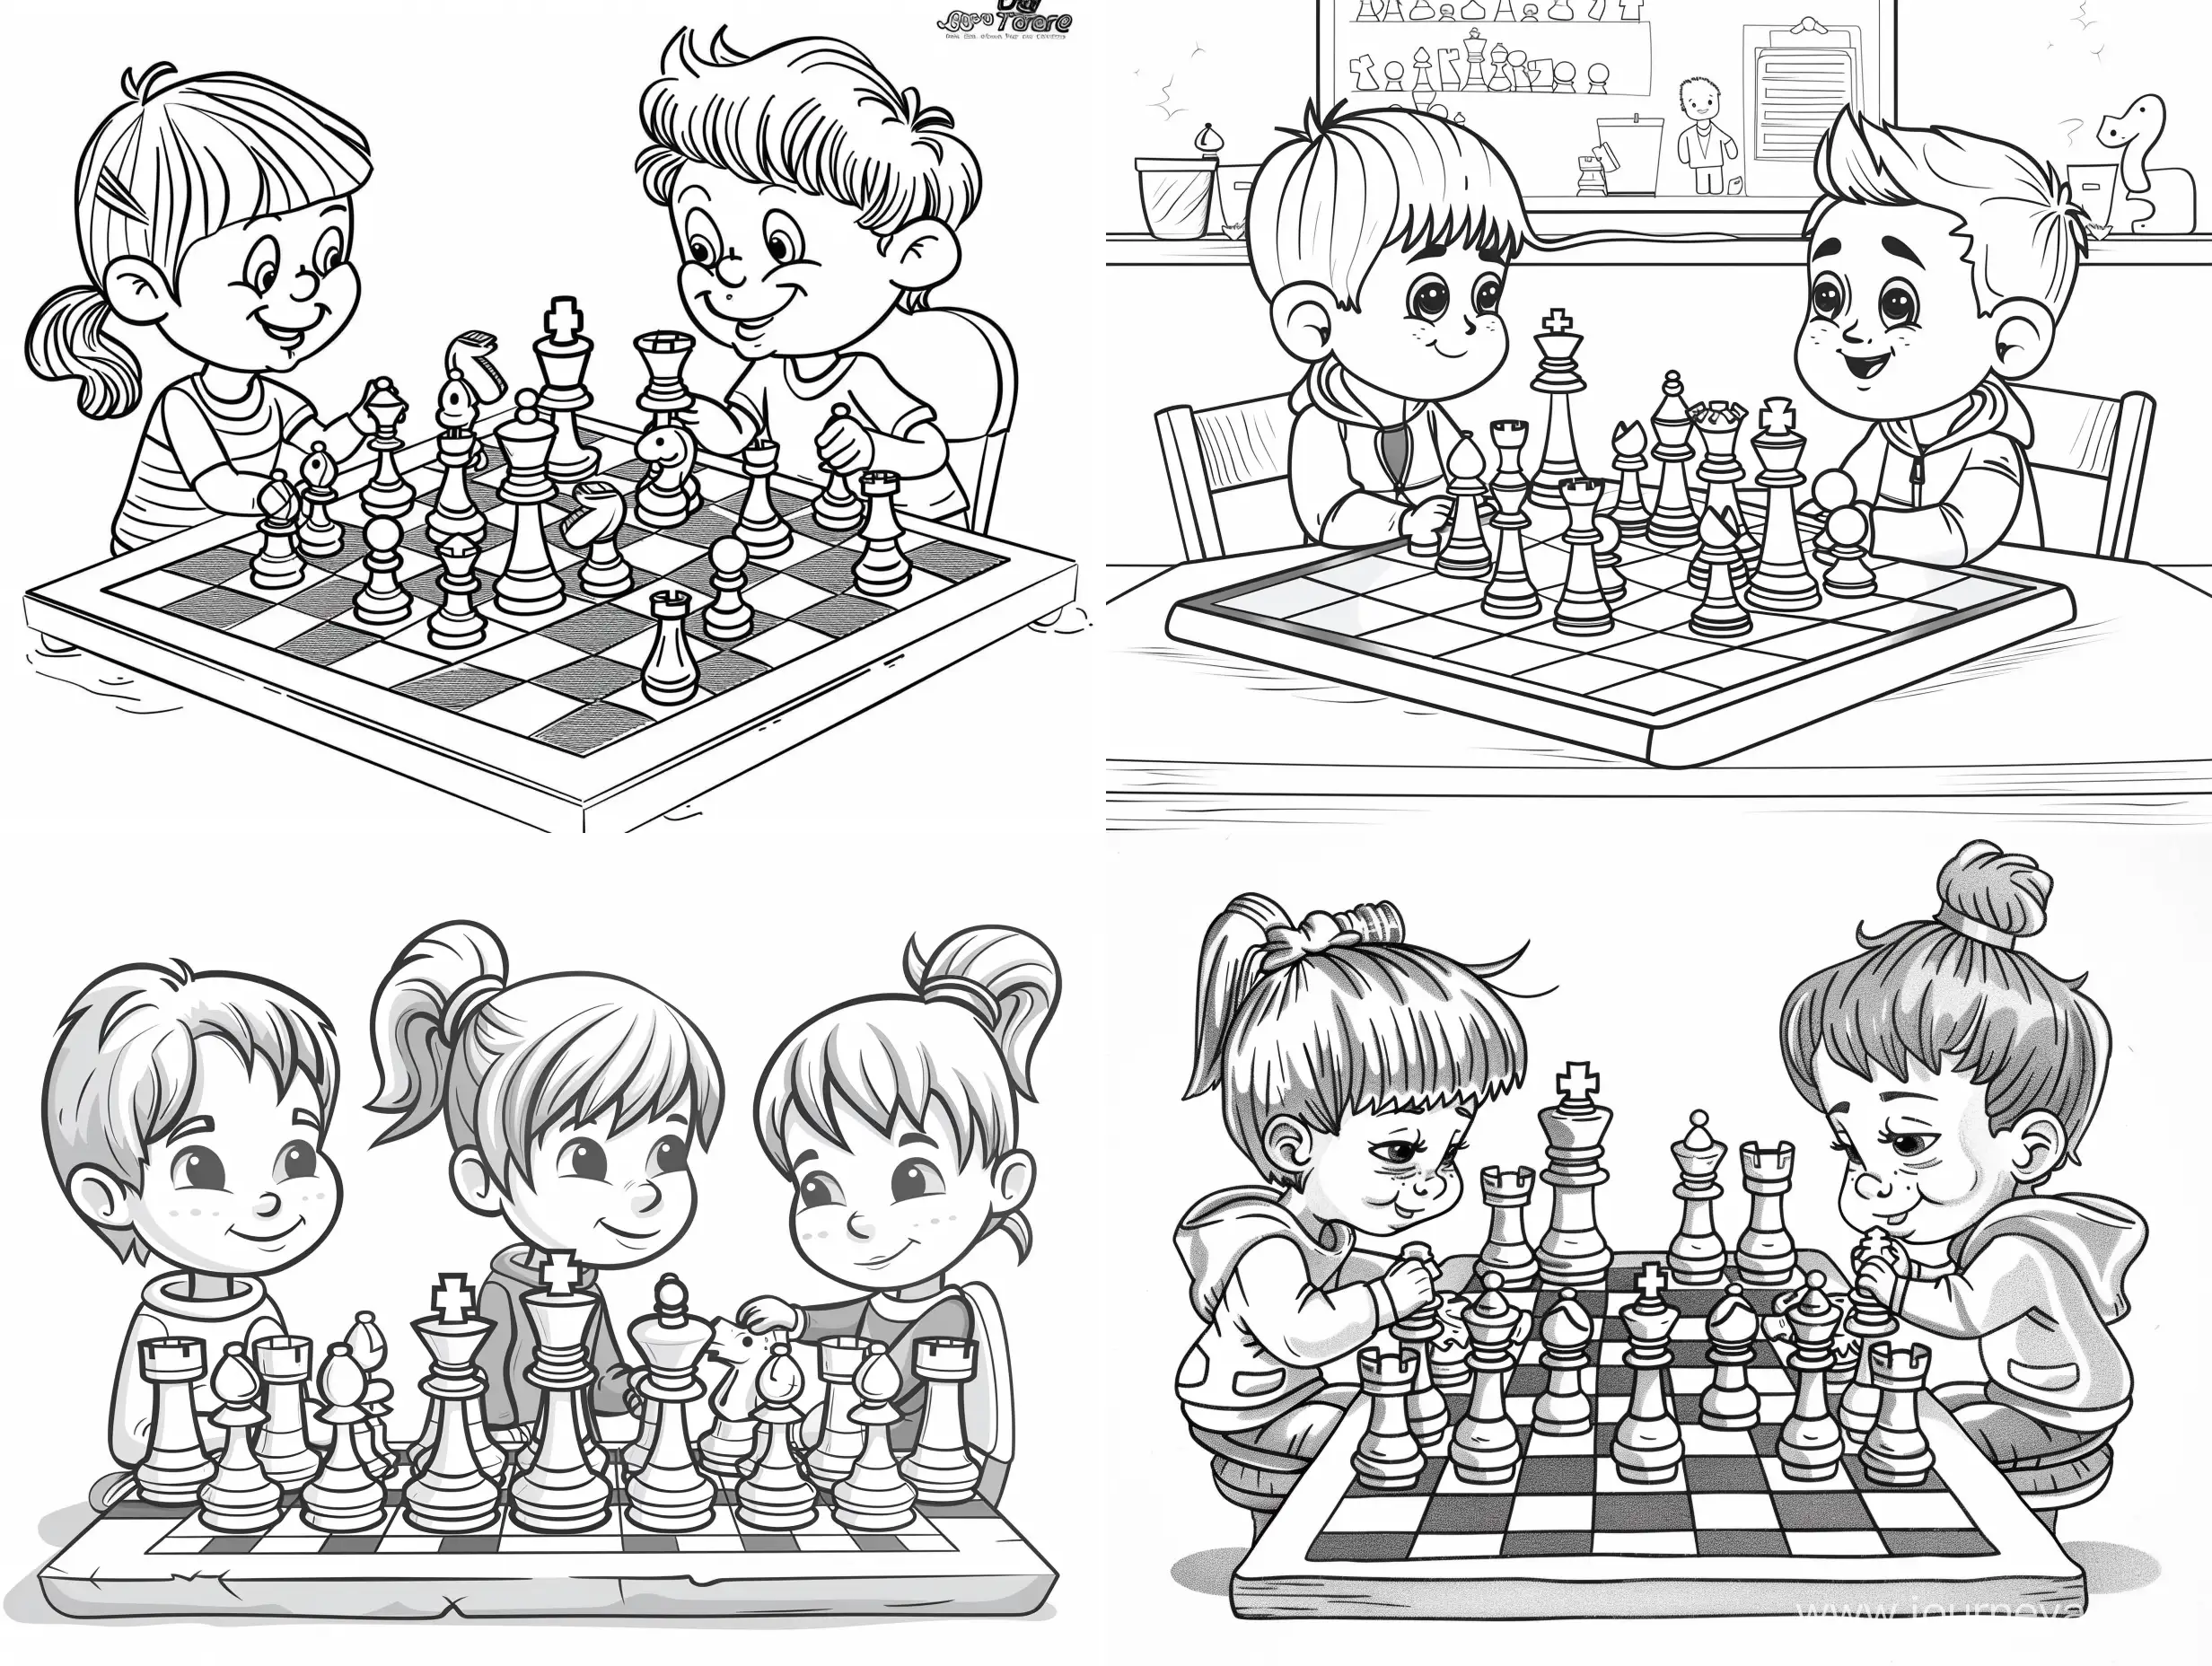 coloring page for kids, detailed, simply cartoon style, isolated, funny, children's chess tournament